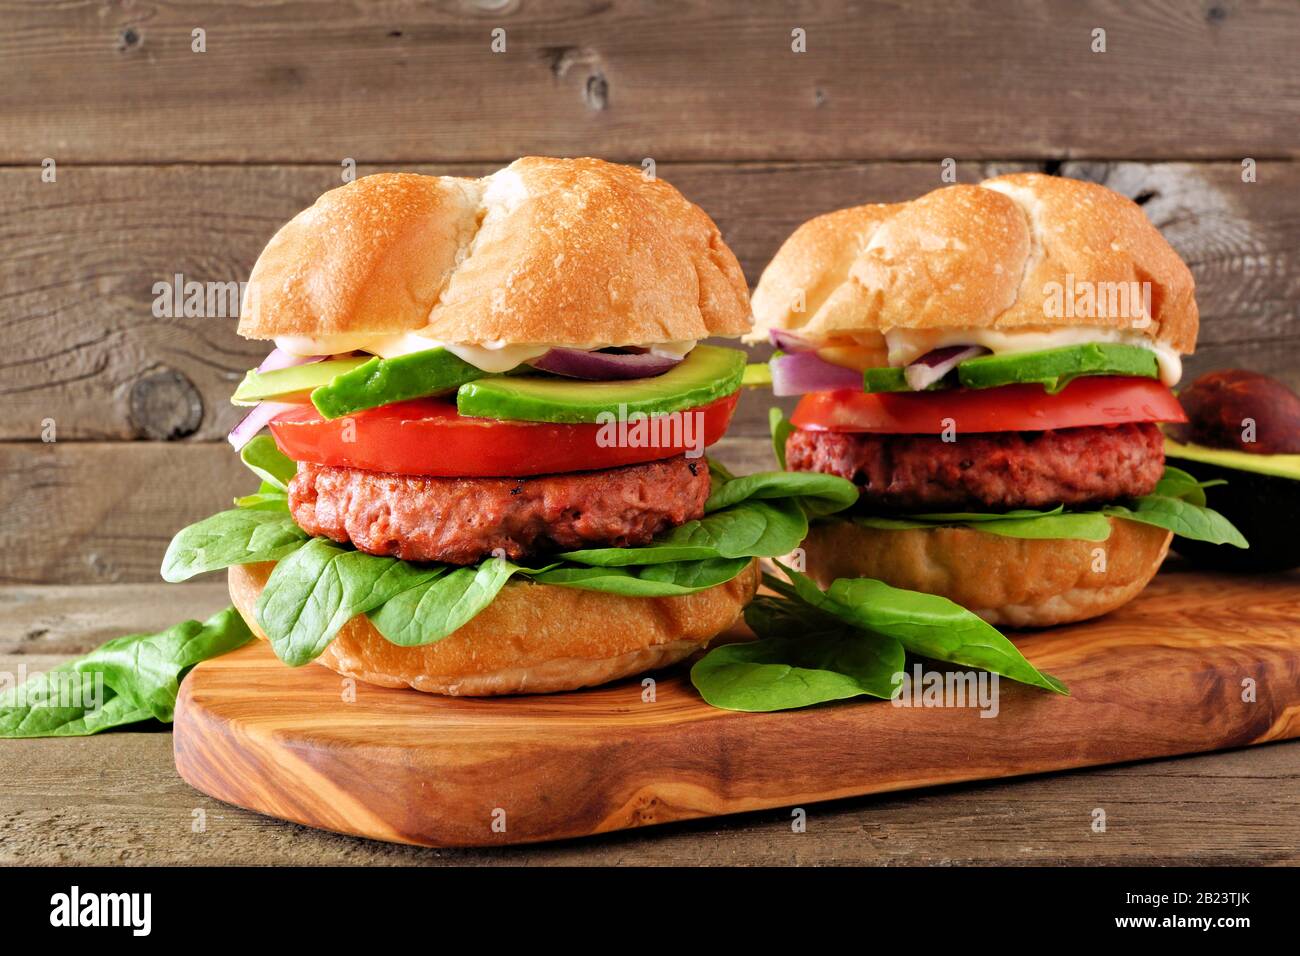 Plant based meatless burgers with avocado, tomato and spinach on a serving board against a rustic wood background Stock Photo